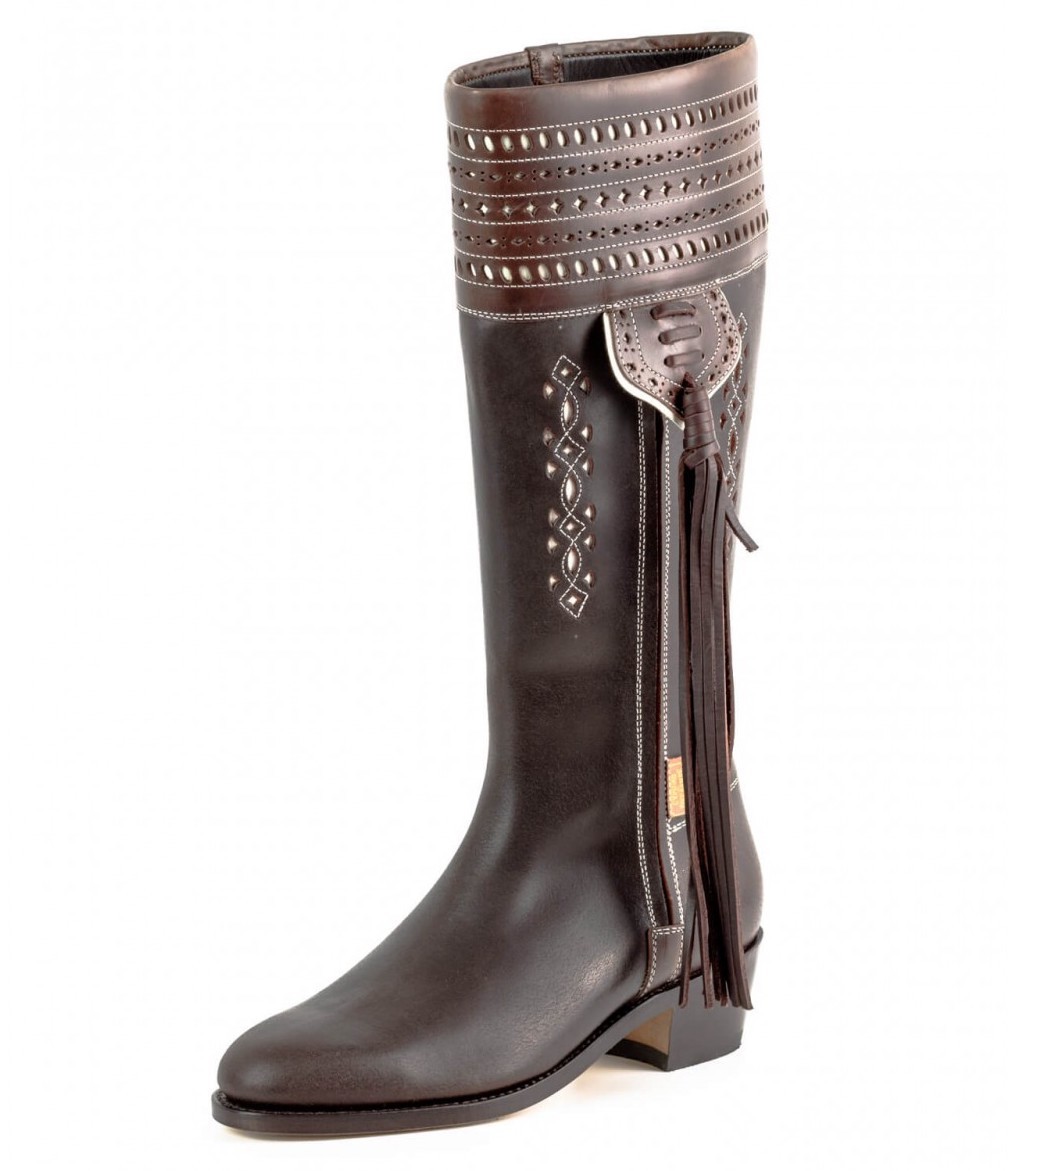 Spanish Style Riding Boots | vlr.eng.br